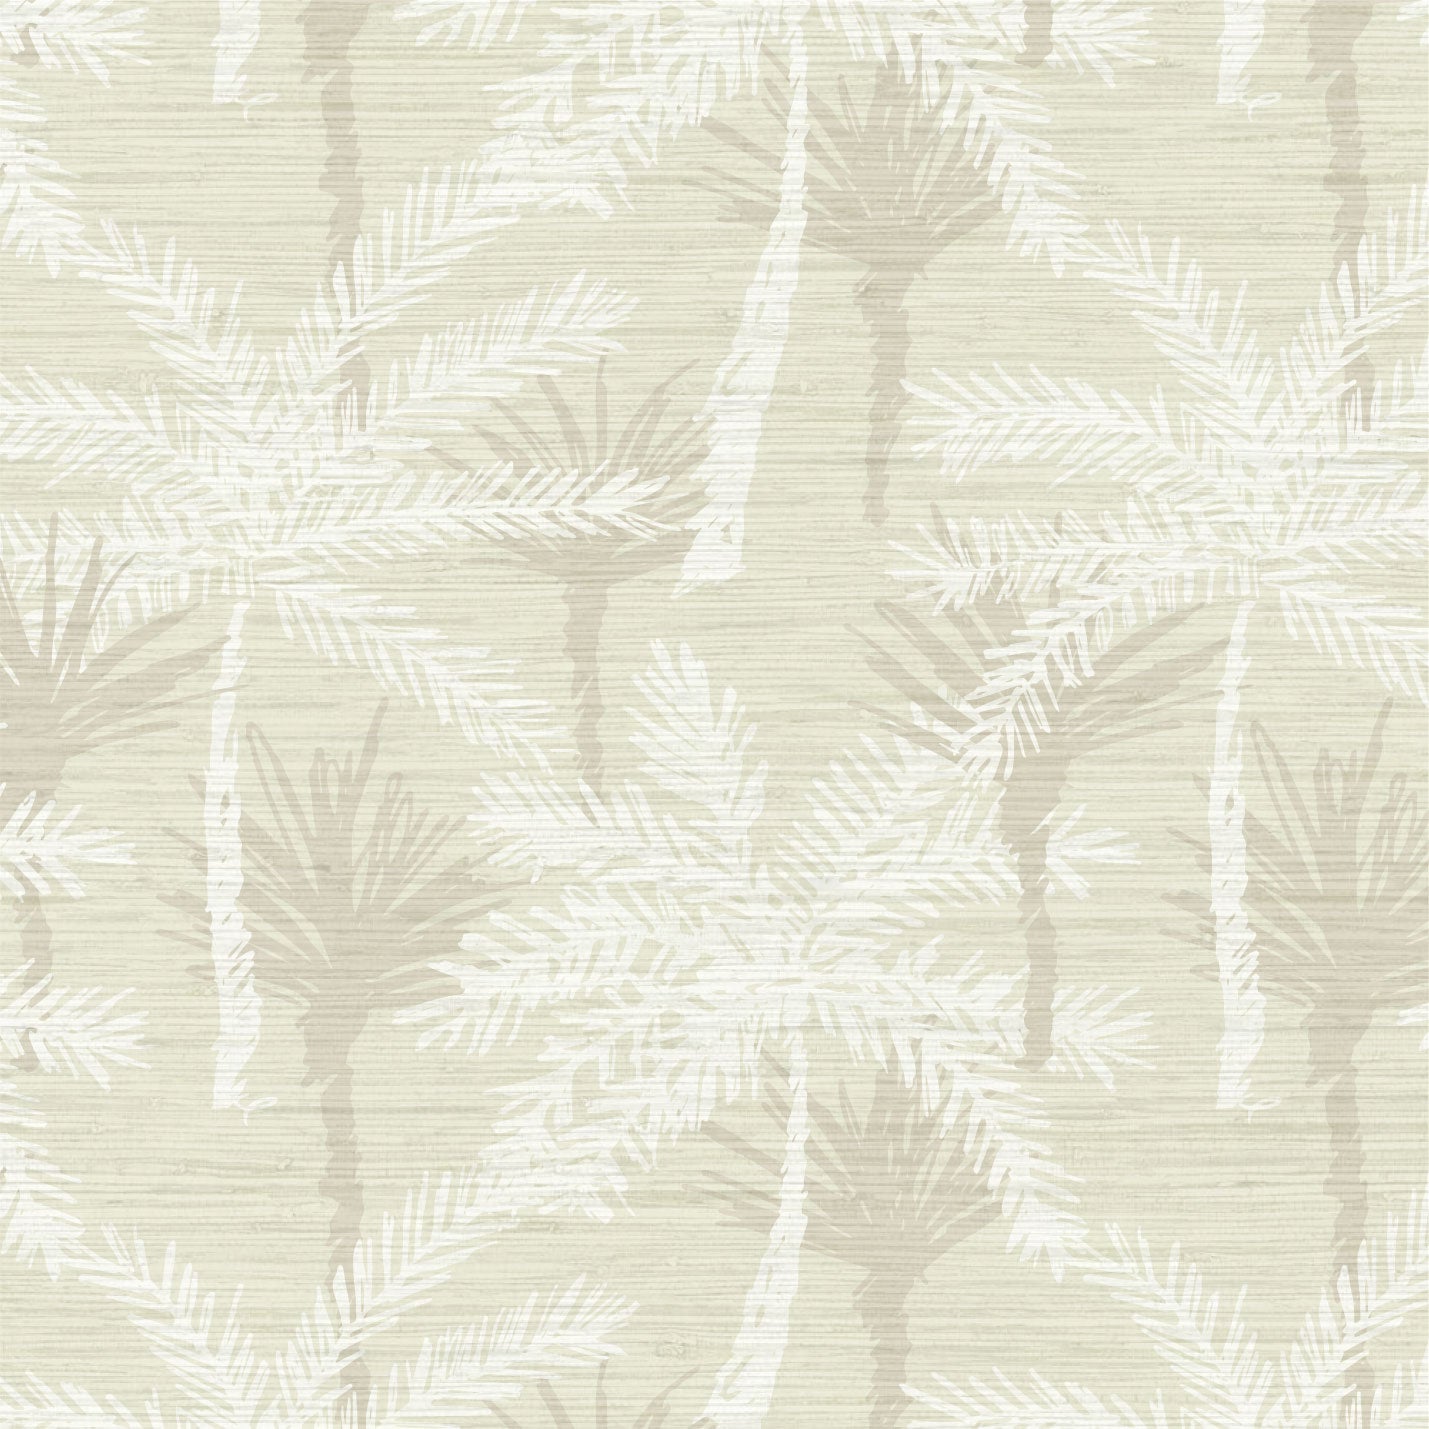 grasscloth printed wallpaper with a cream base color with tonal linear and overlapping palm trees in a variety of shades of tans and whites